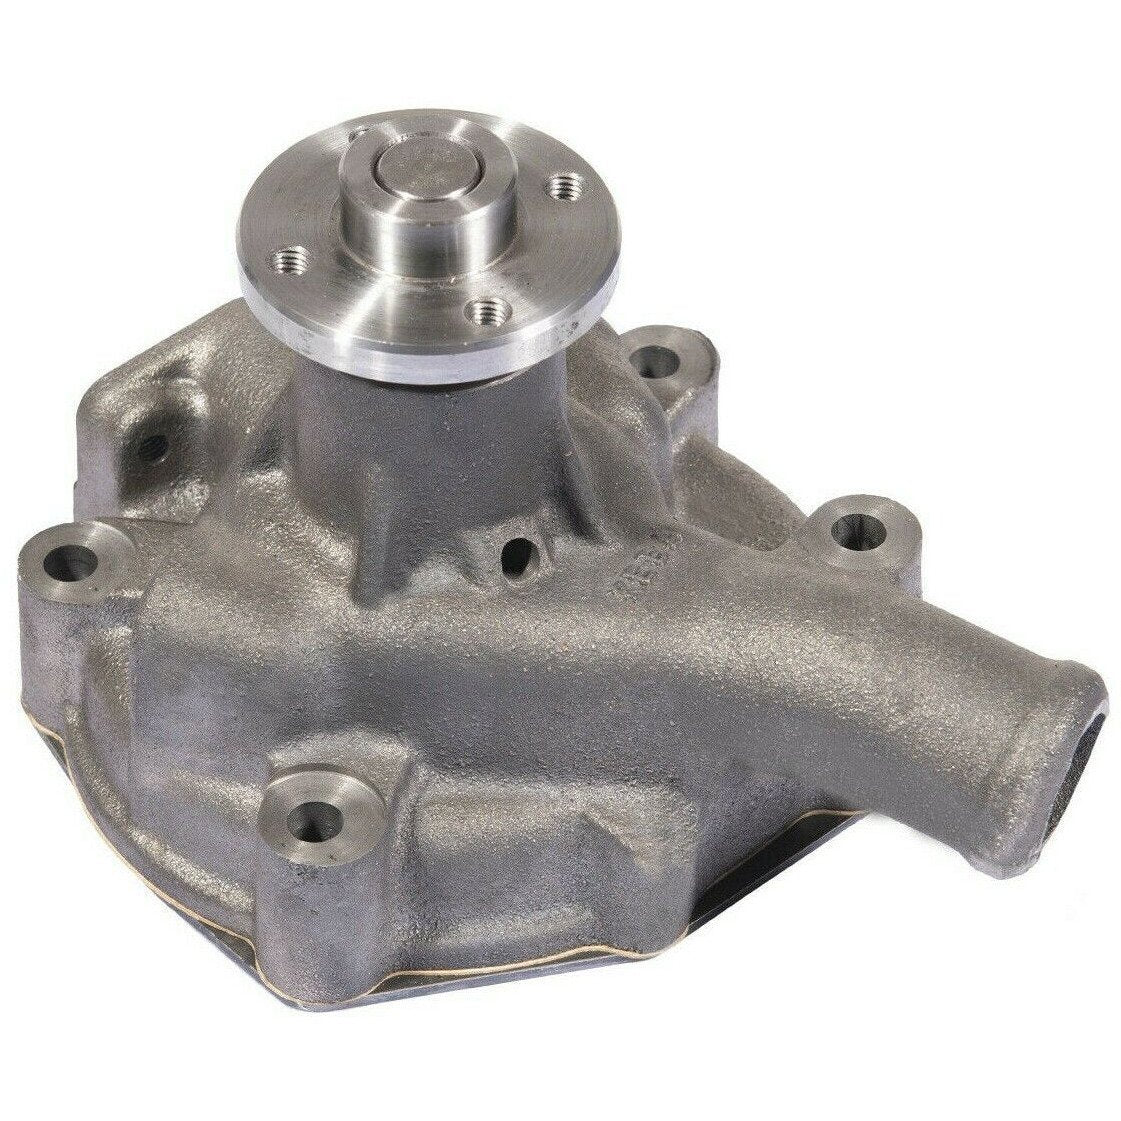 Water Pump Replacement For Kubota M4950-S M5500 M5950-S M6970 M7030 15481-73030